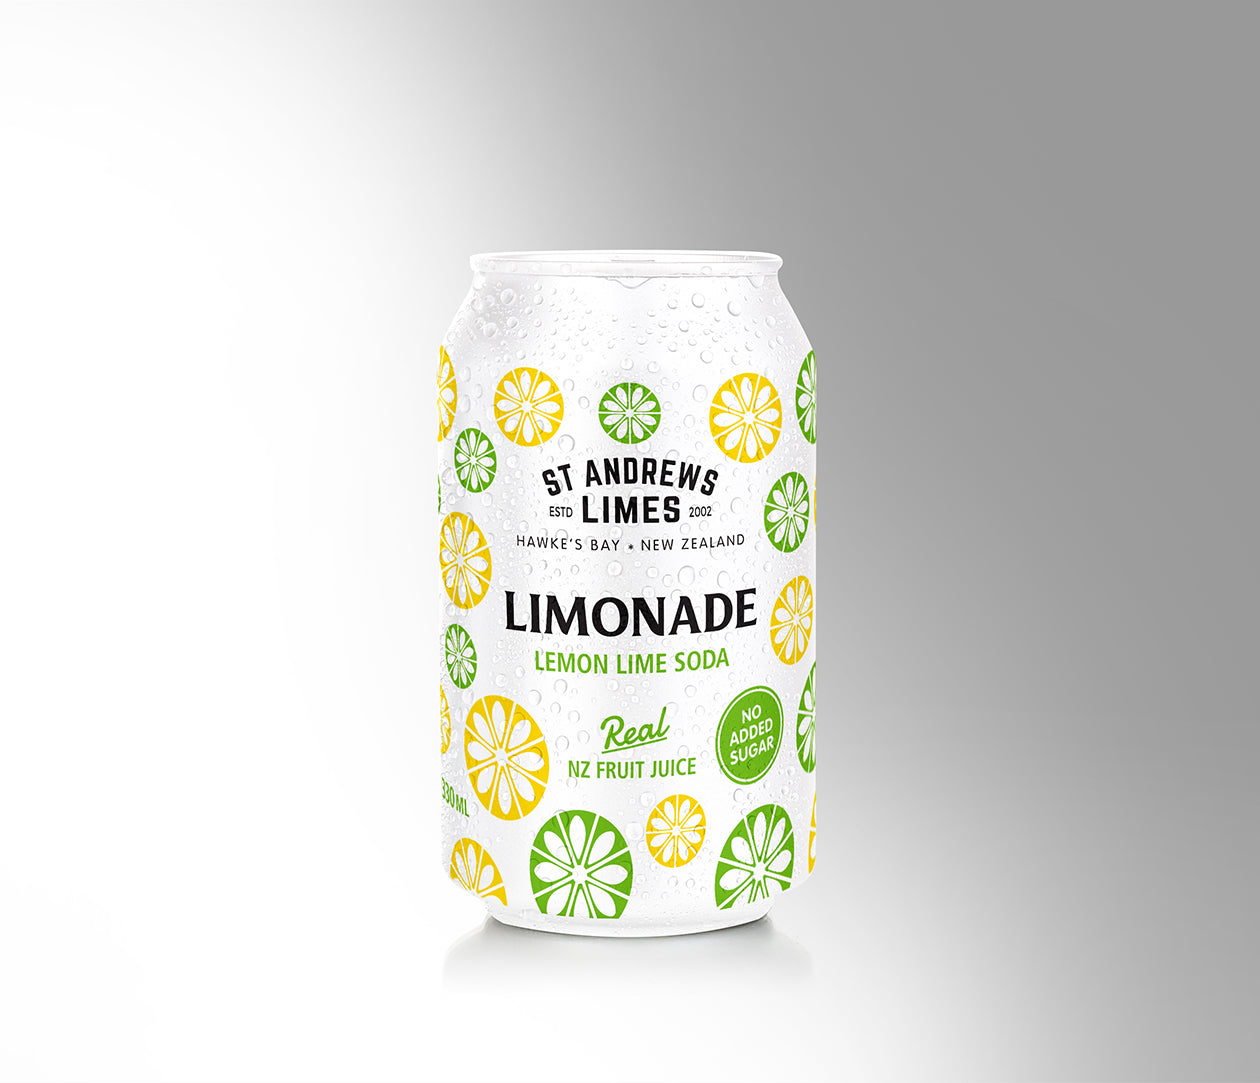 Limonade can